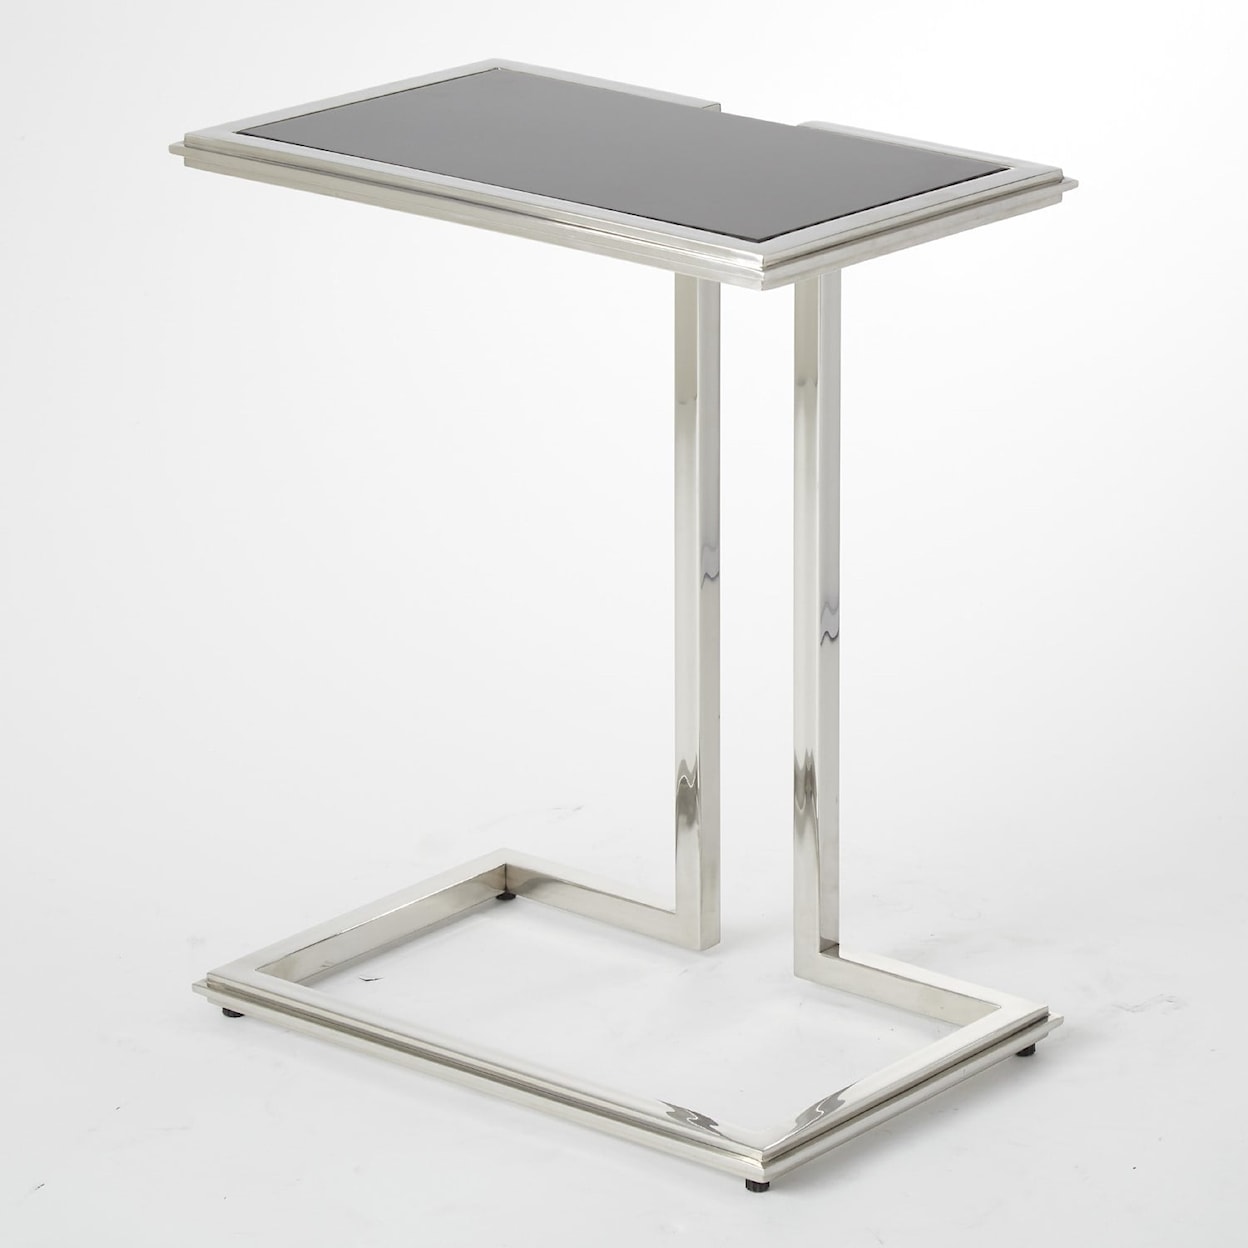 Global Views Accents Cozy Up Table-Stainless Steel- Lg